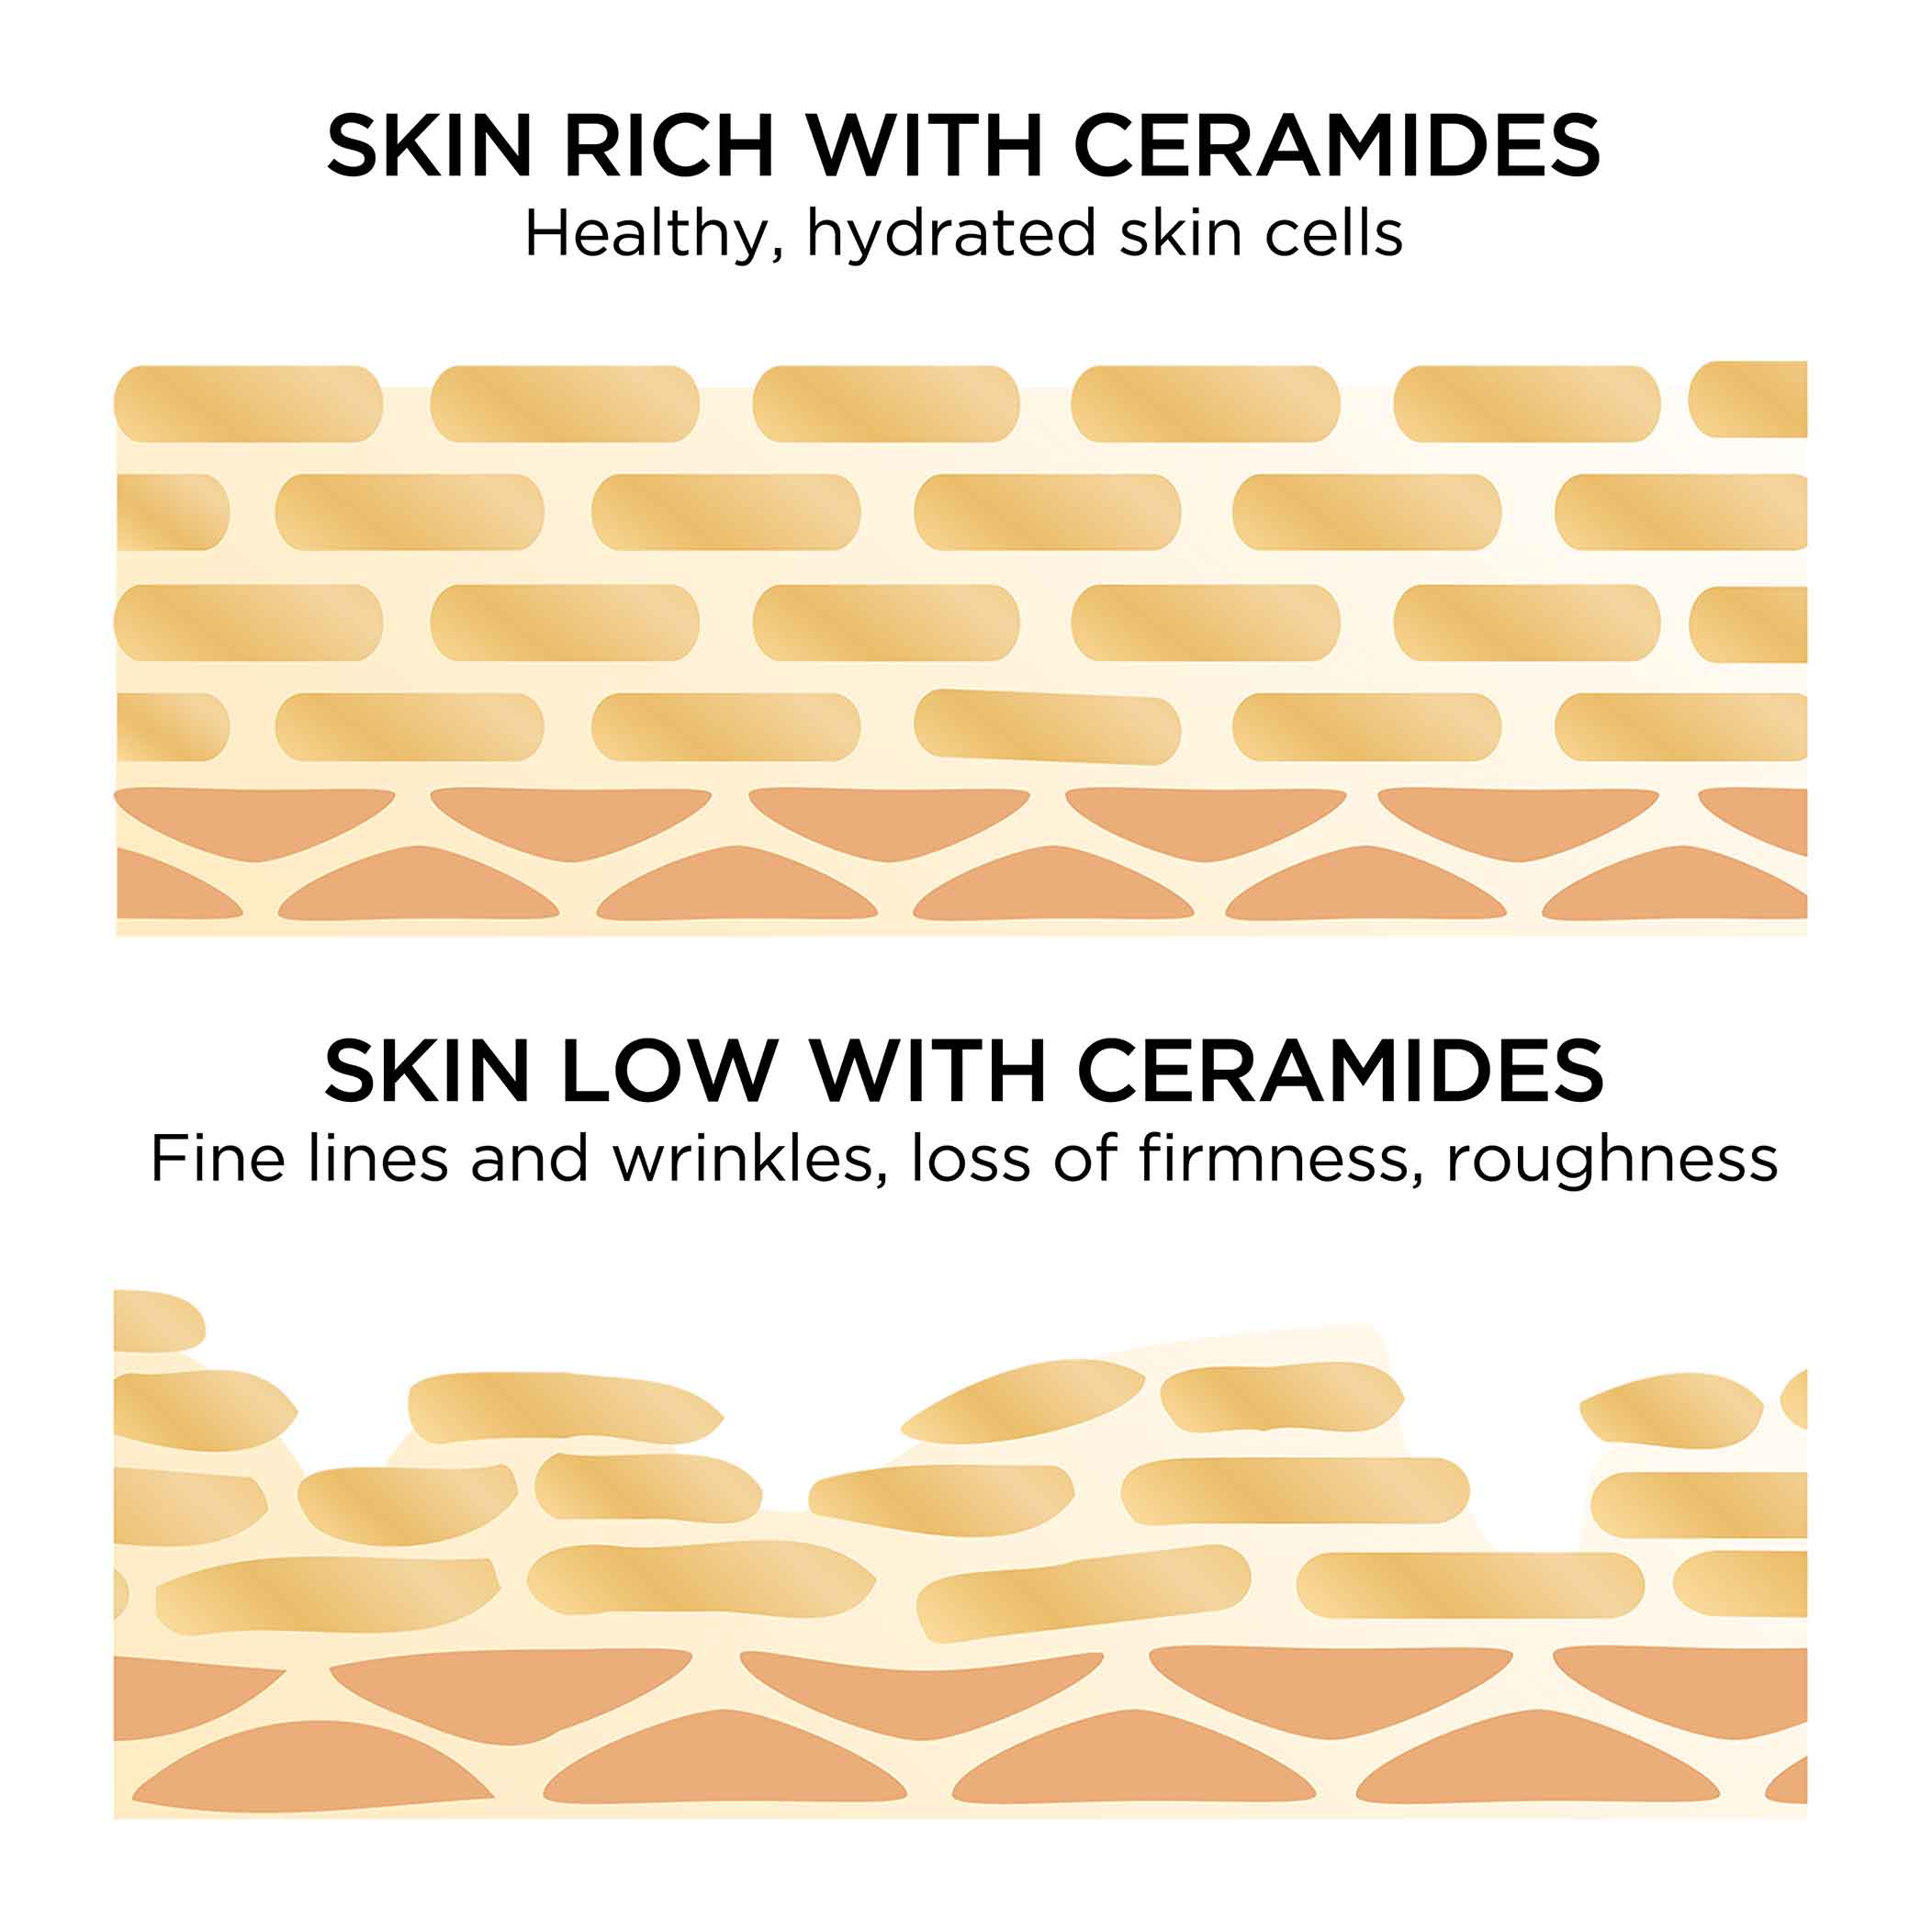 Skin rich with ceramides are healthy, hydrated skin cells vs skin low with ceramides have fine lines and wrinkles, loss of firmness, roughness